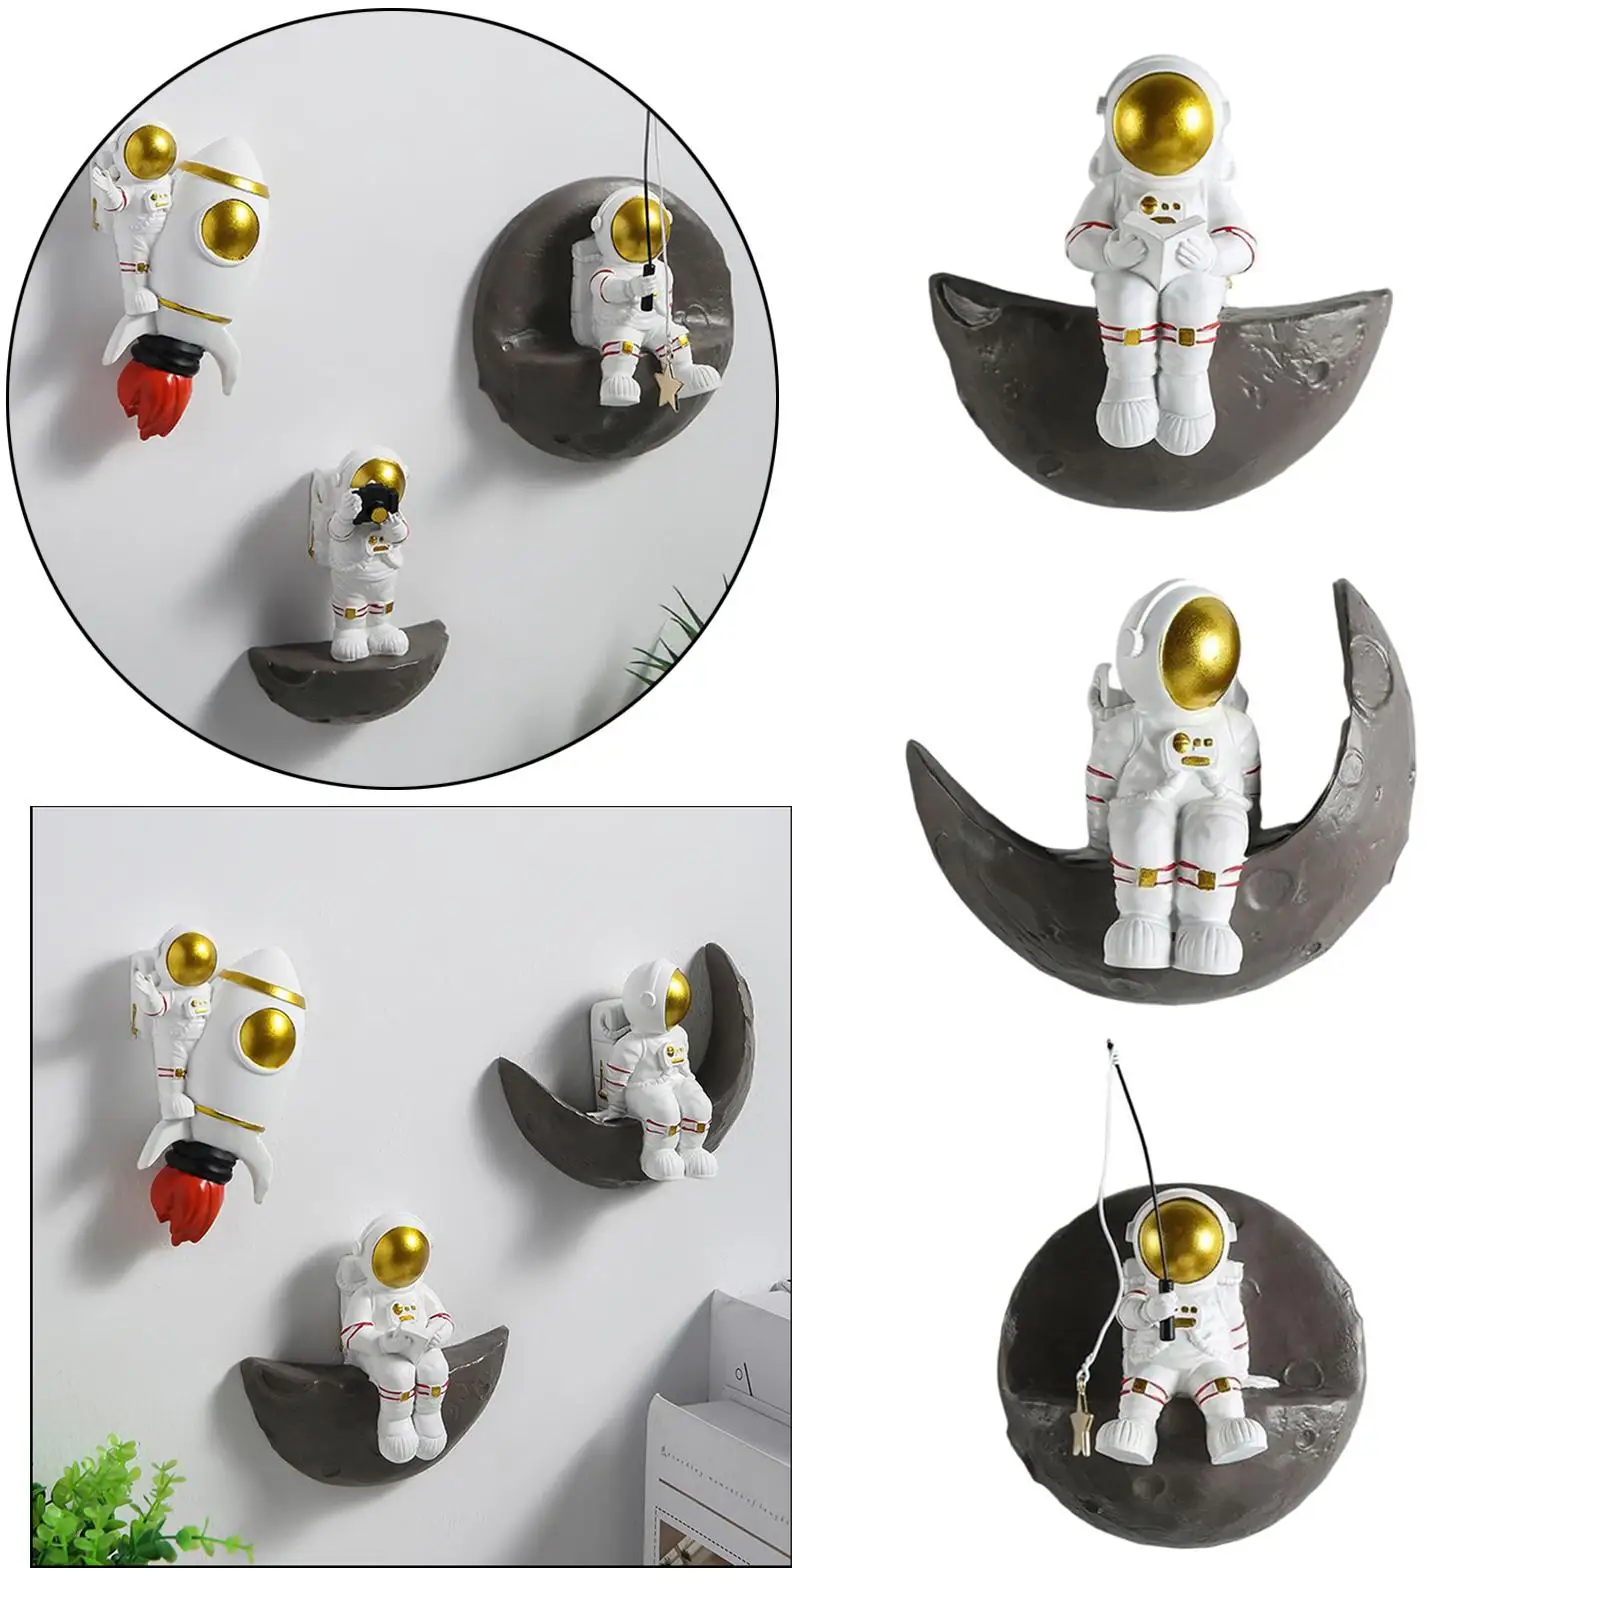 3 Pieces Art Astronaut Statues Wall Mounted 3D Resin Spaceman Wall Sculpture Statues Ornament Outdoor Indoor Decor